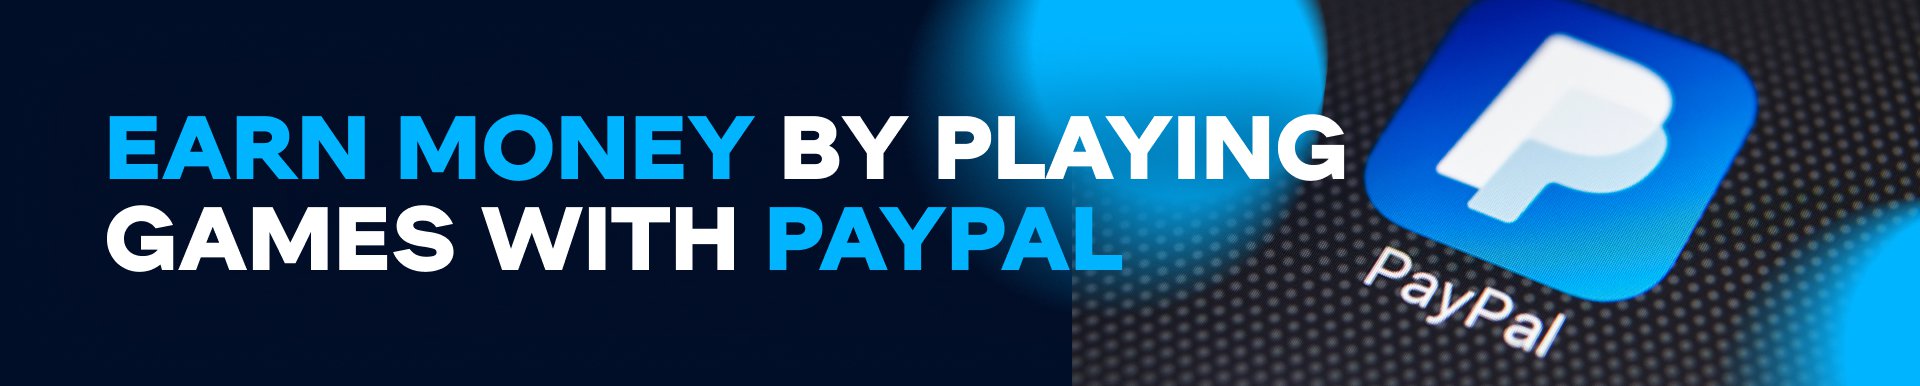 Earn Money by Playing Games with Paypal